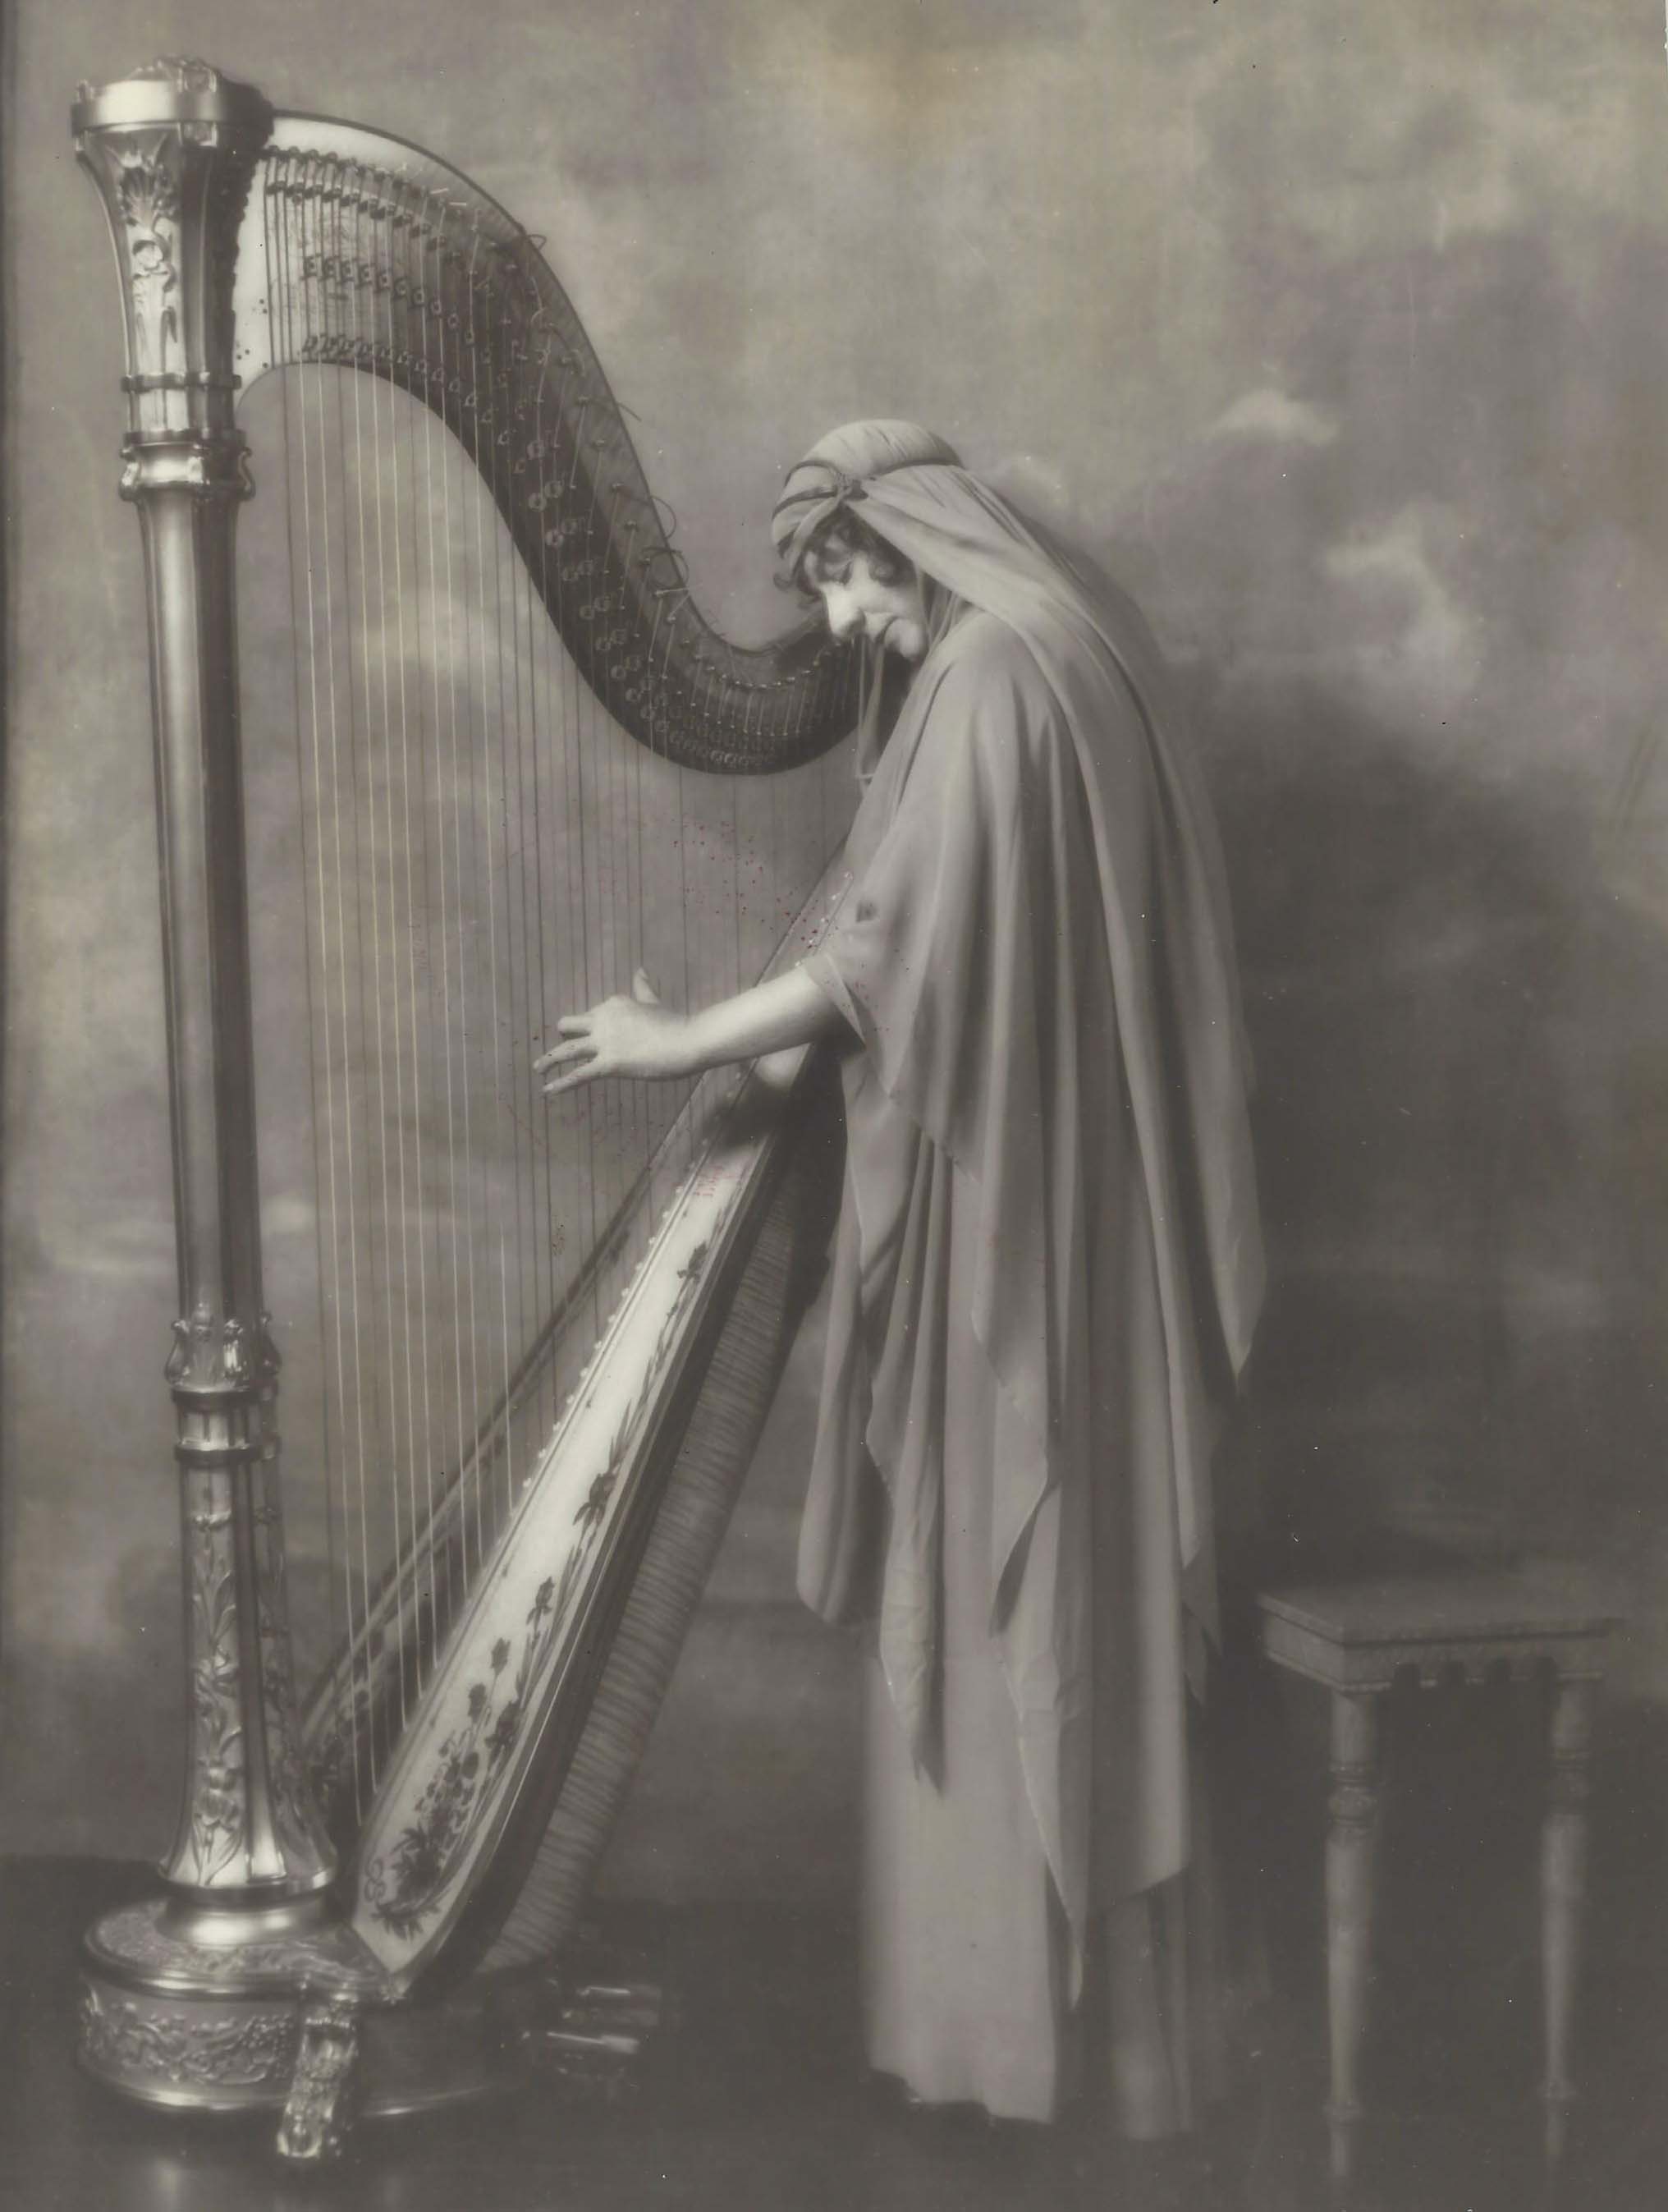 evangeline booth playing harp